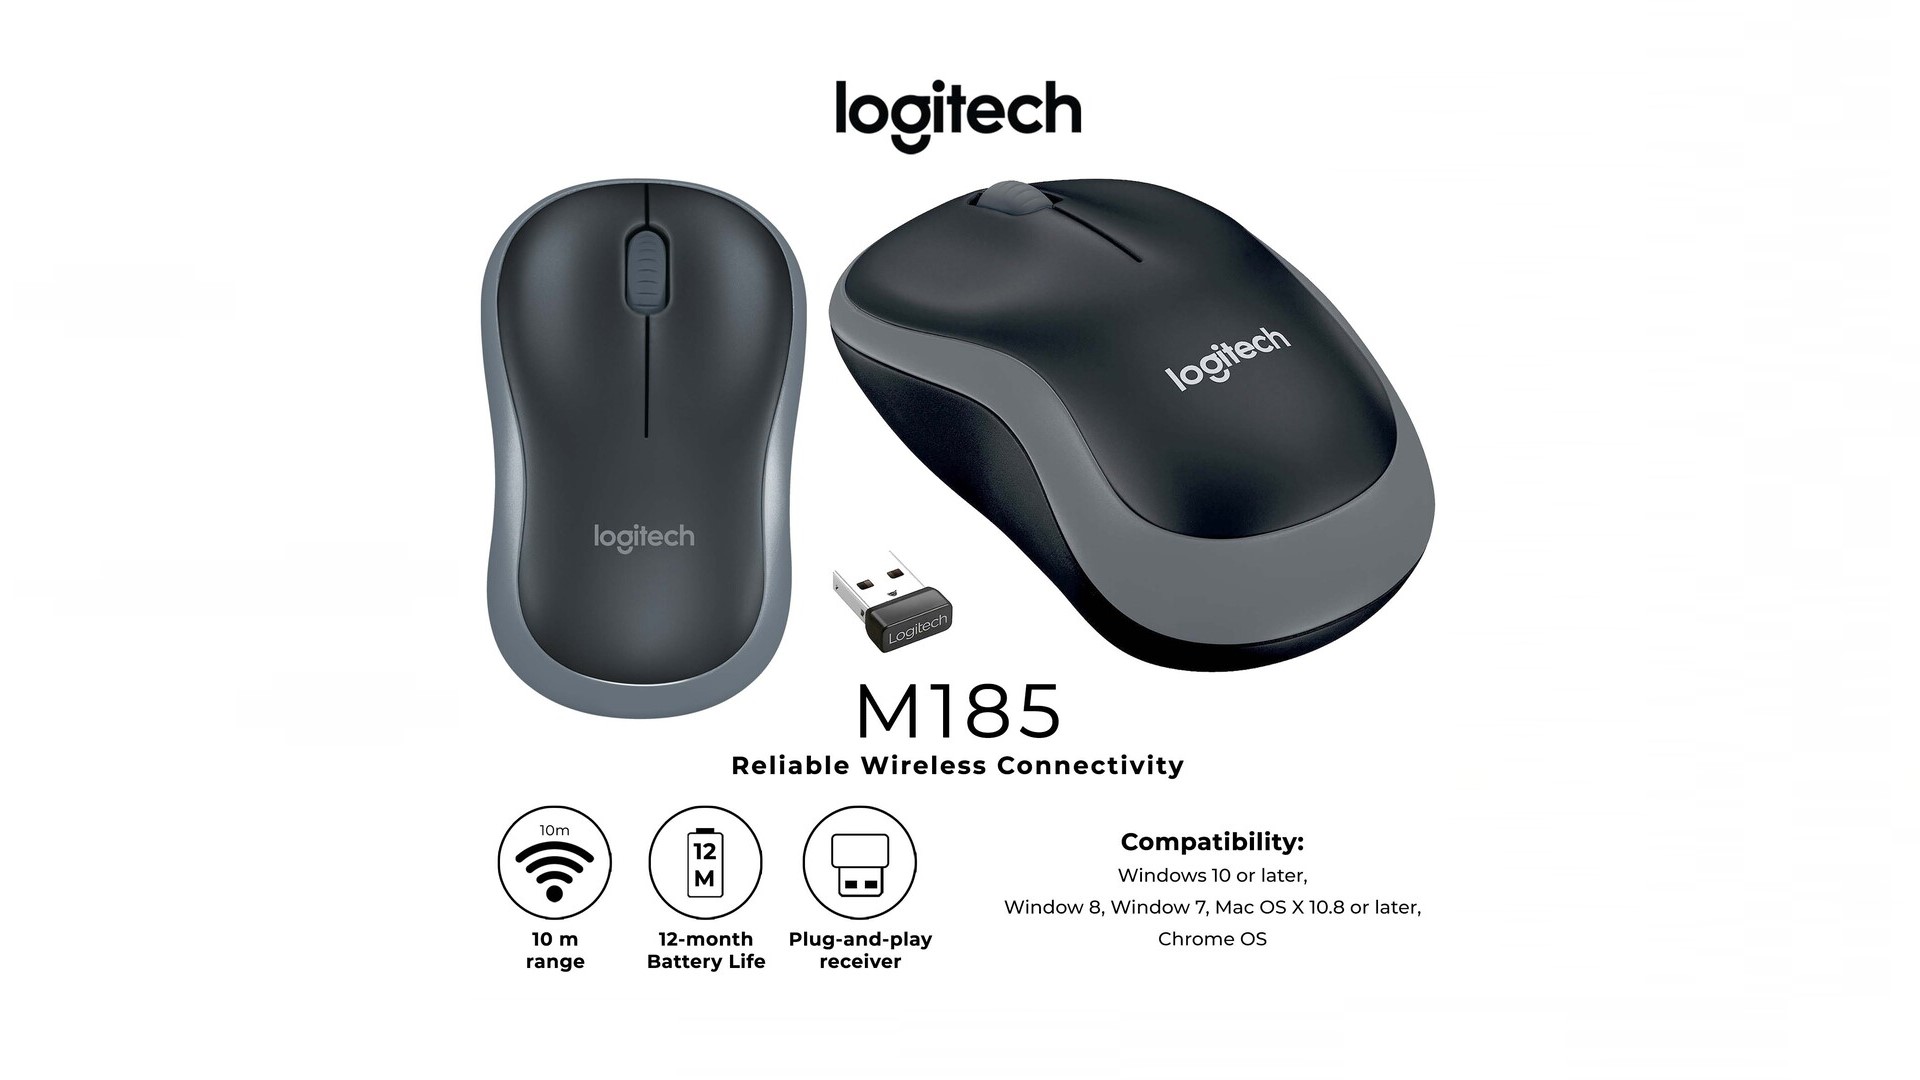 Features of the M185 mouse